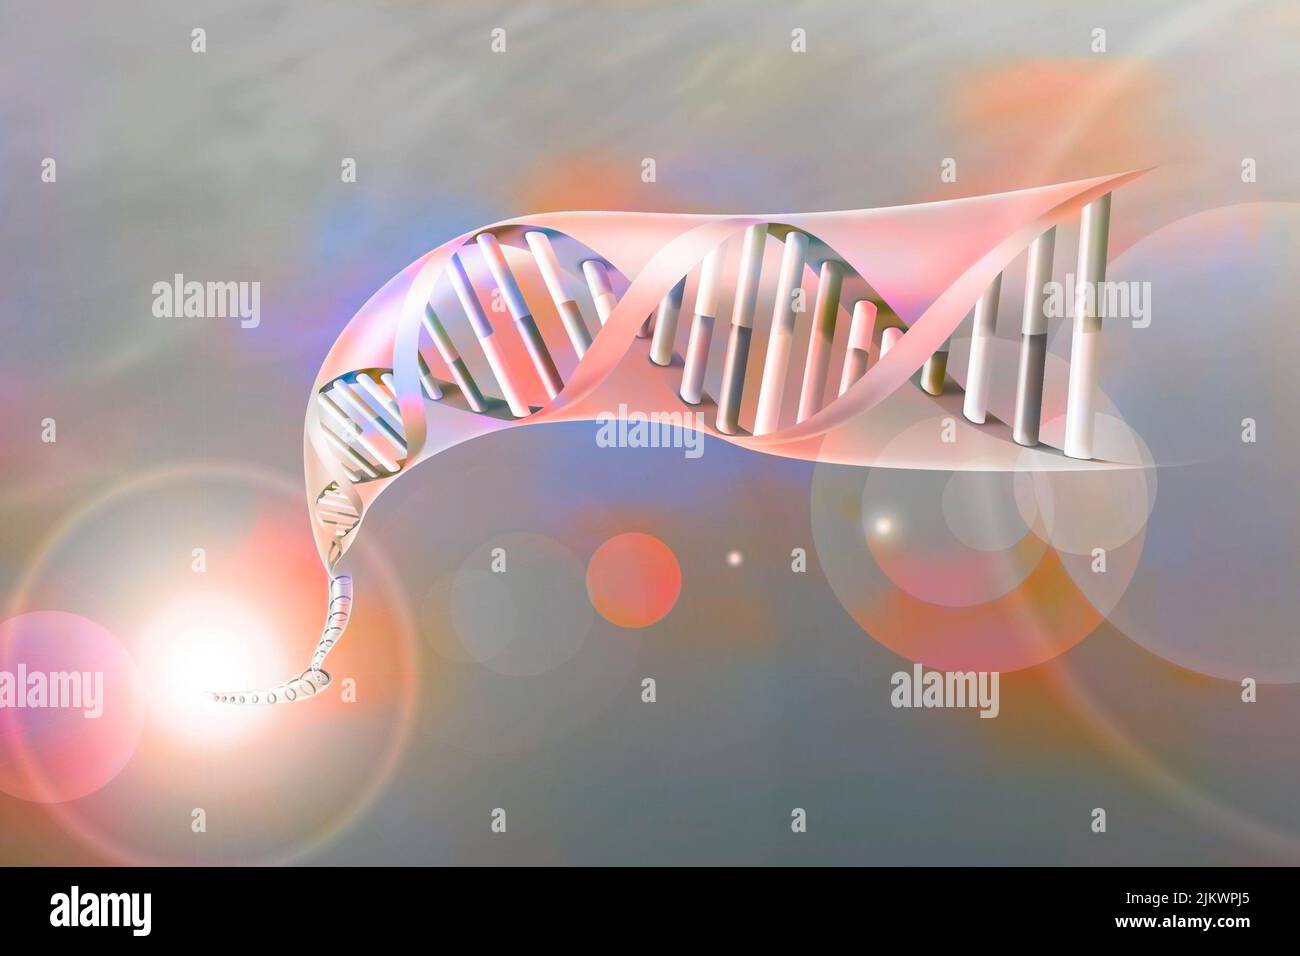 Double helix of DNA with the nucleotide bases: adenine, thymine, cytosine and guanine. Stock Photo